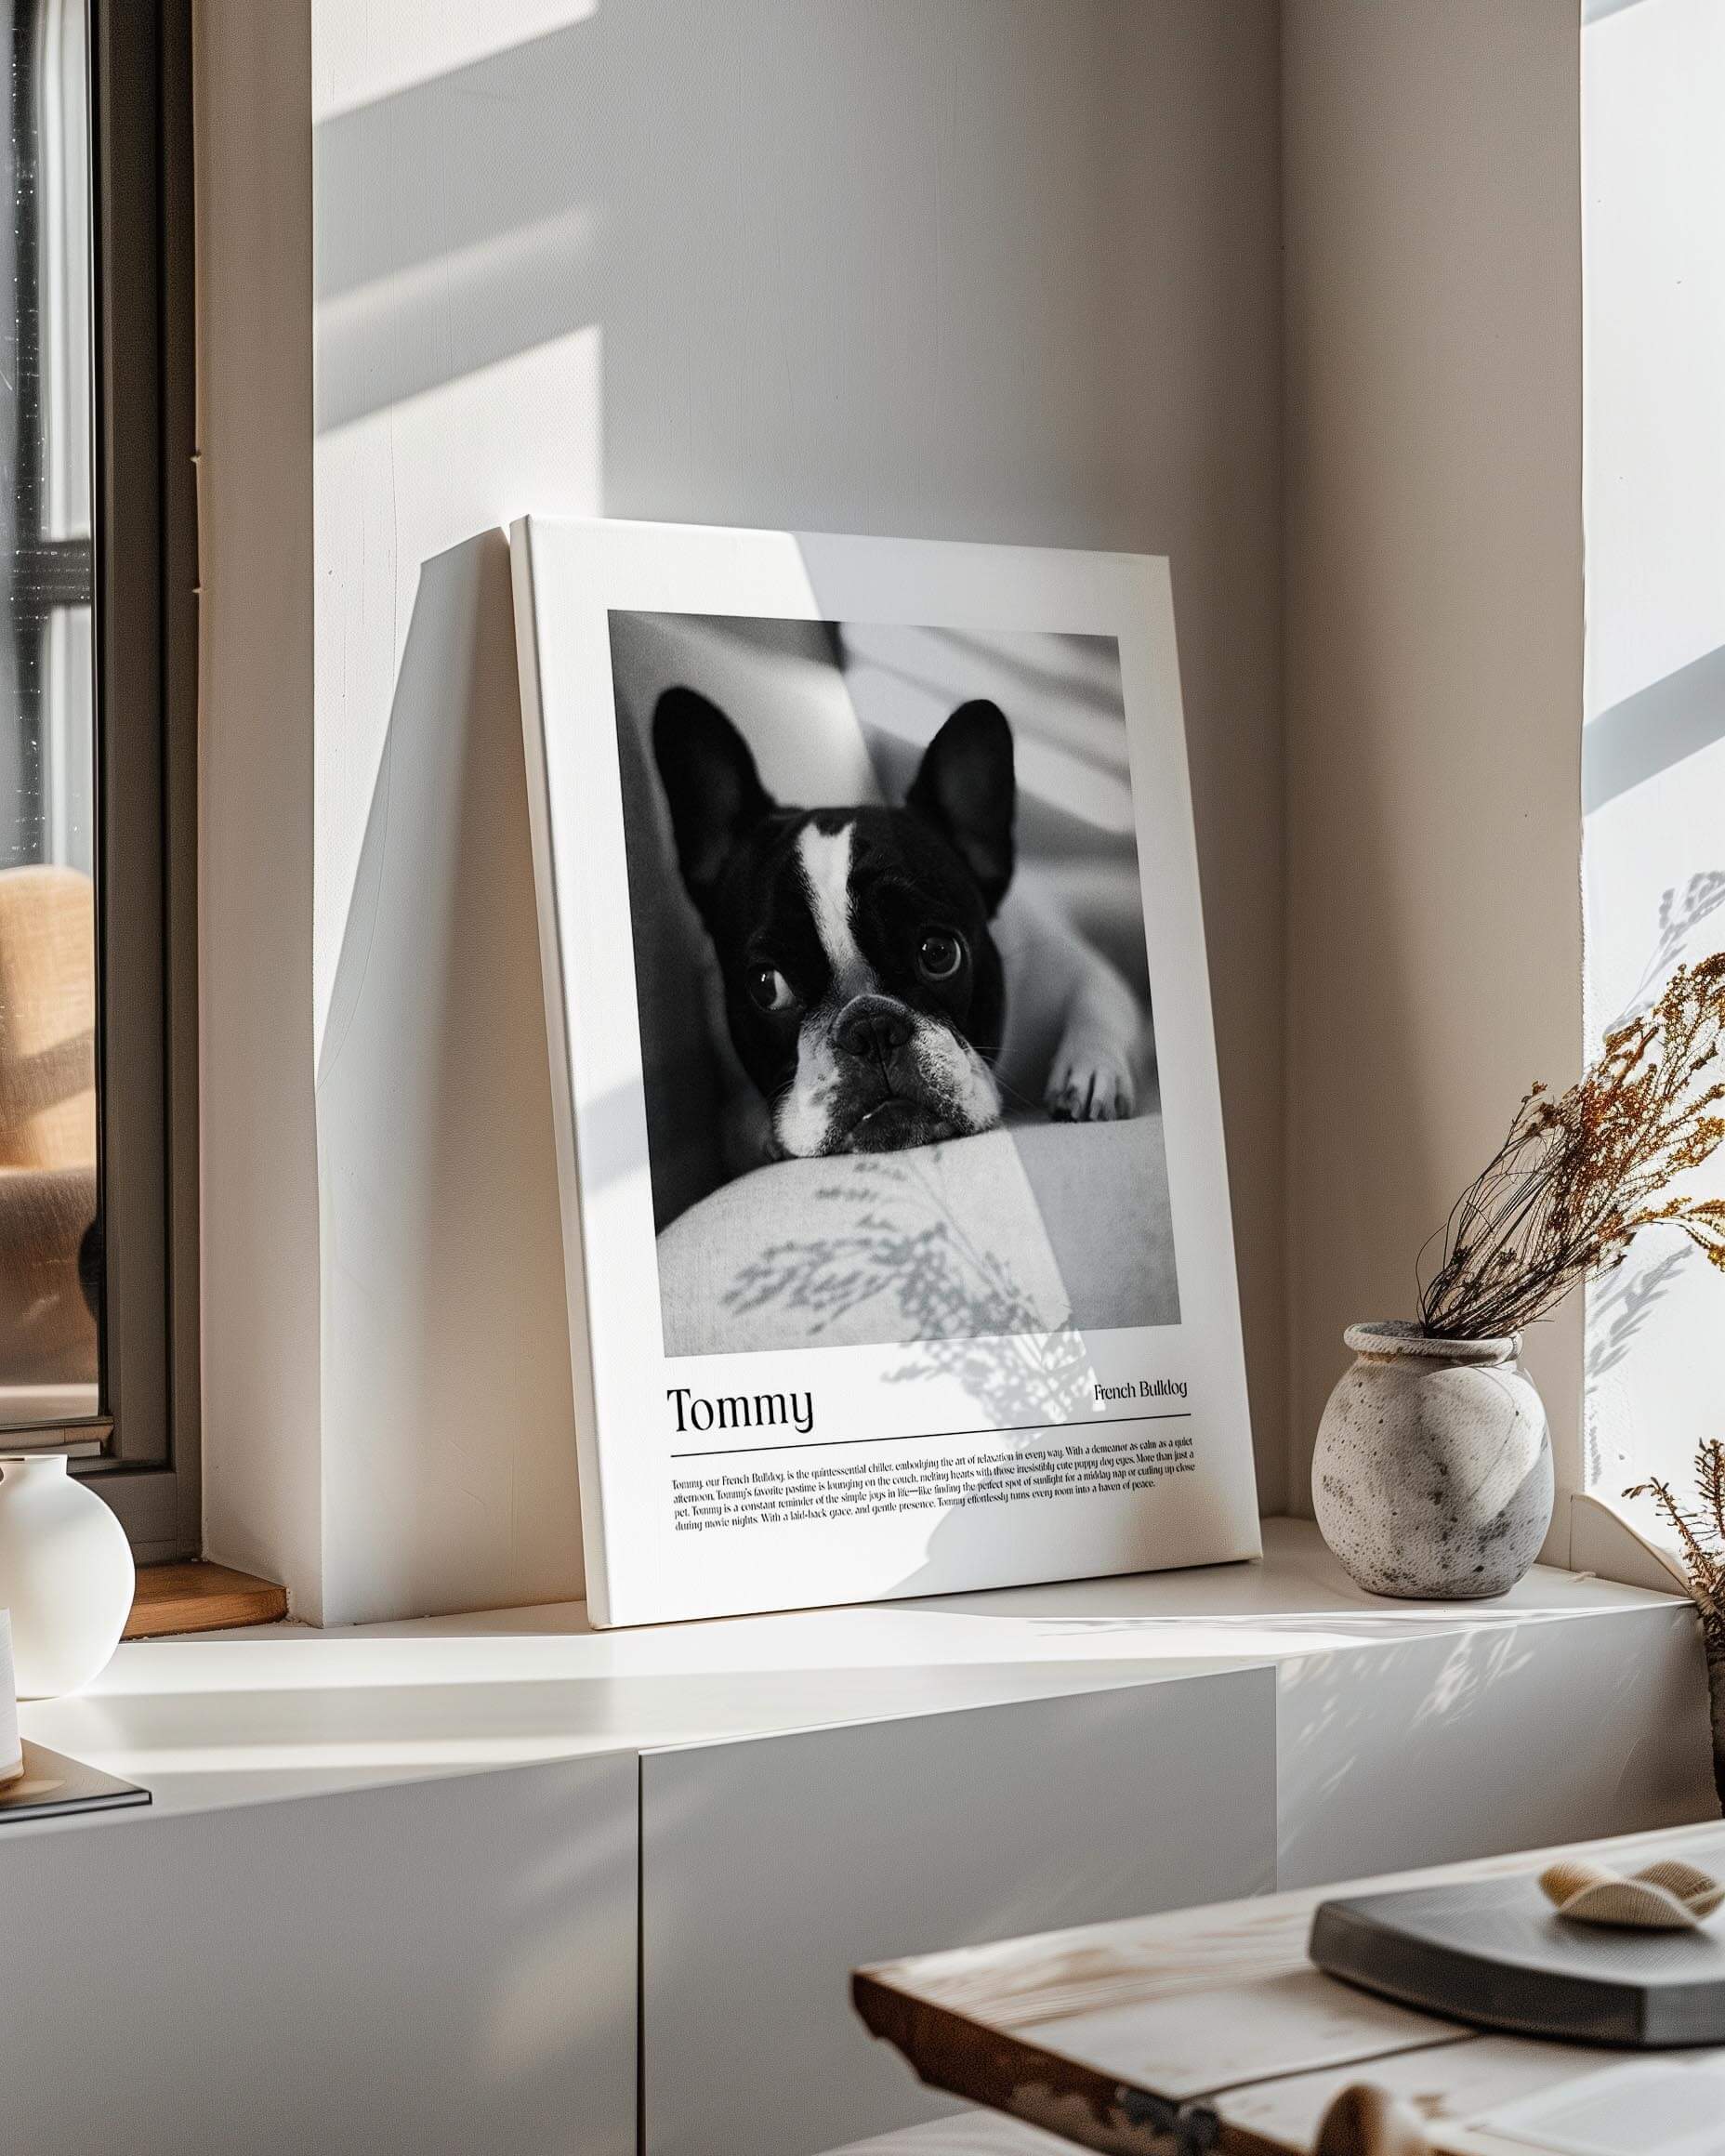 French Bulldog photo printed as black and white art and custom framed and personalized in modern home decor setting making a unique custom gift for dog mom and dog dad pet parents created by vogue paws personalized pet portraits